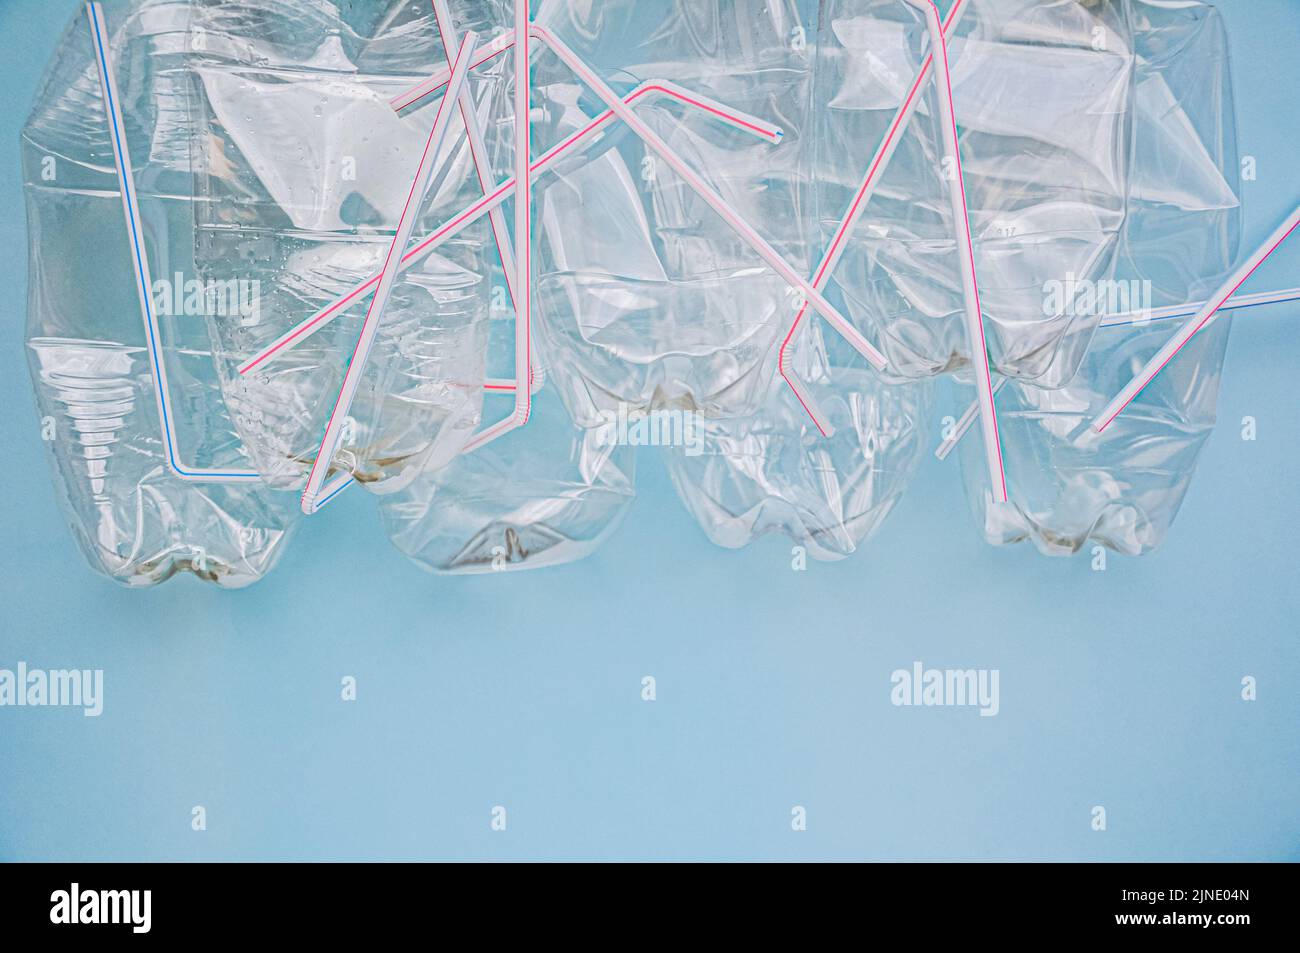 Plastic waste, plastic bottles and straws on a blue background. The concept of waste disposal and ecology. Zero waste. Pollution, environmental protec Stock Photo